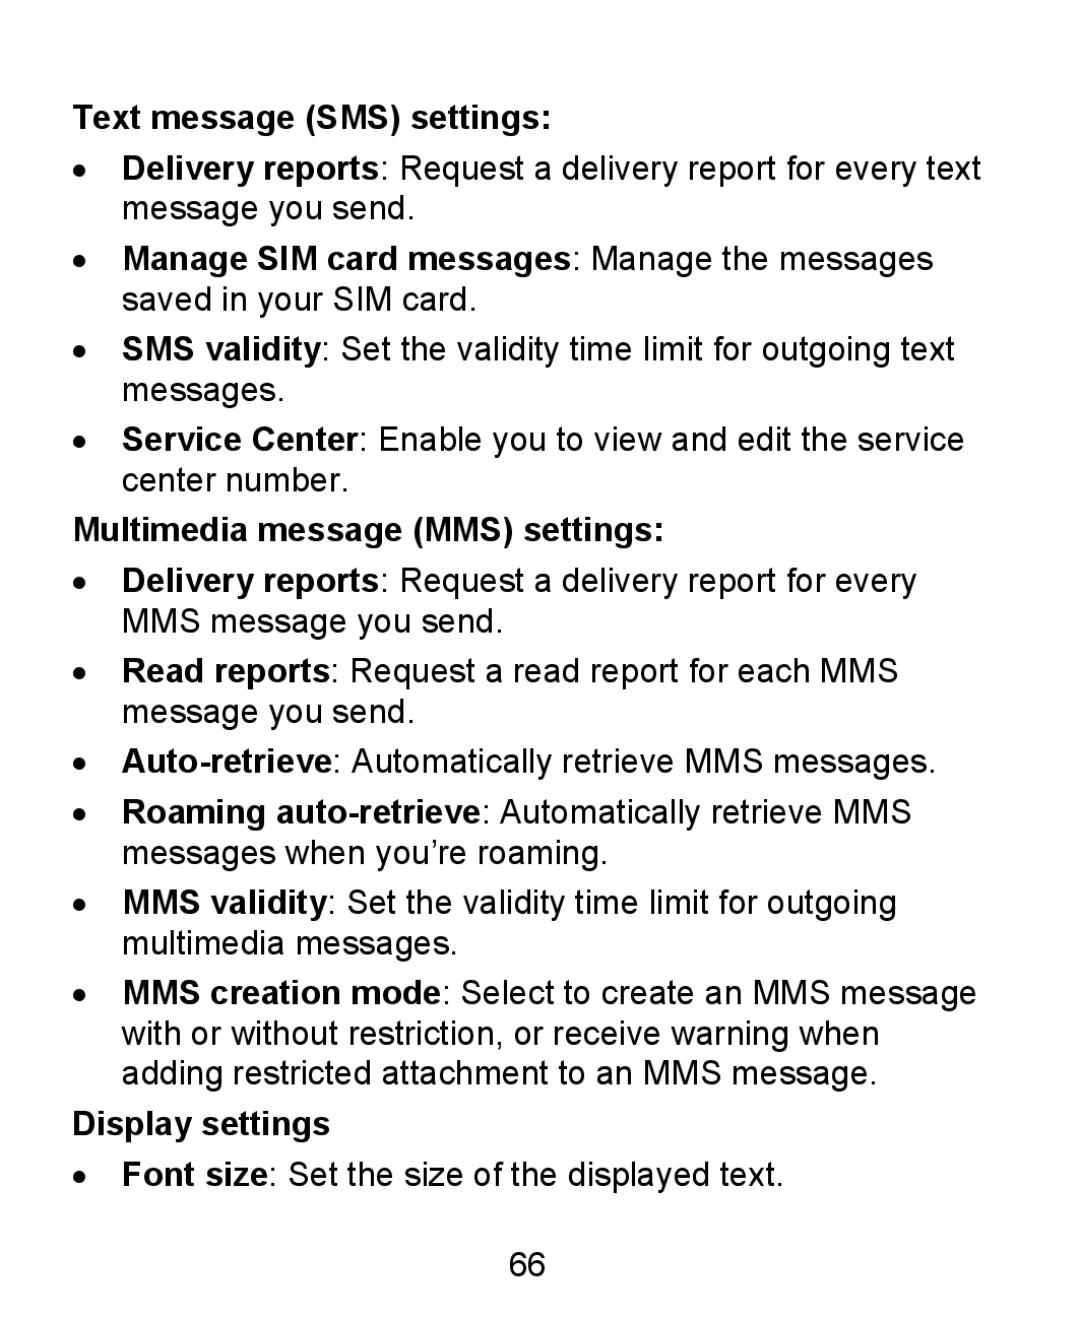 ZTE KIS user manual Text message SMS settings, Multimedia message MMS settings, Display settings 